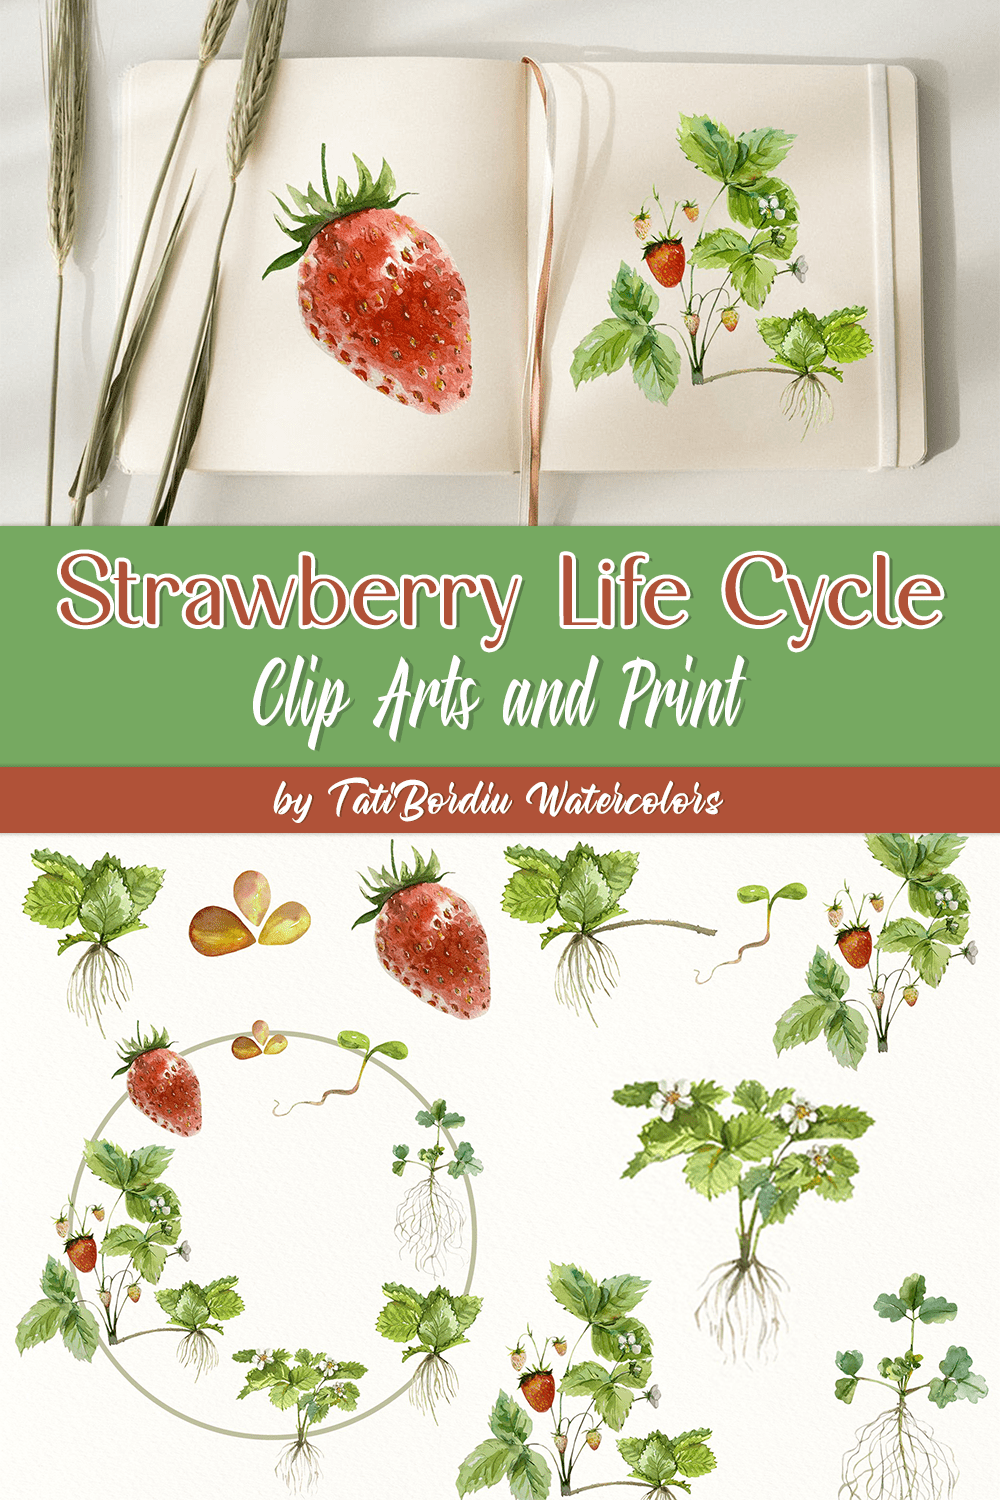 Strawberry Life Cycle Clip Arts and Print - pinterest image preview.